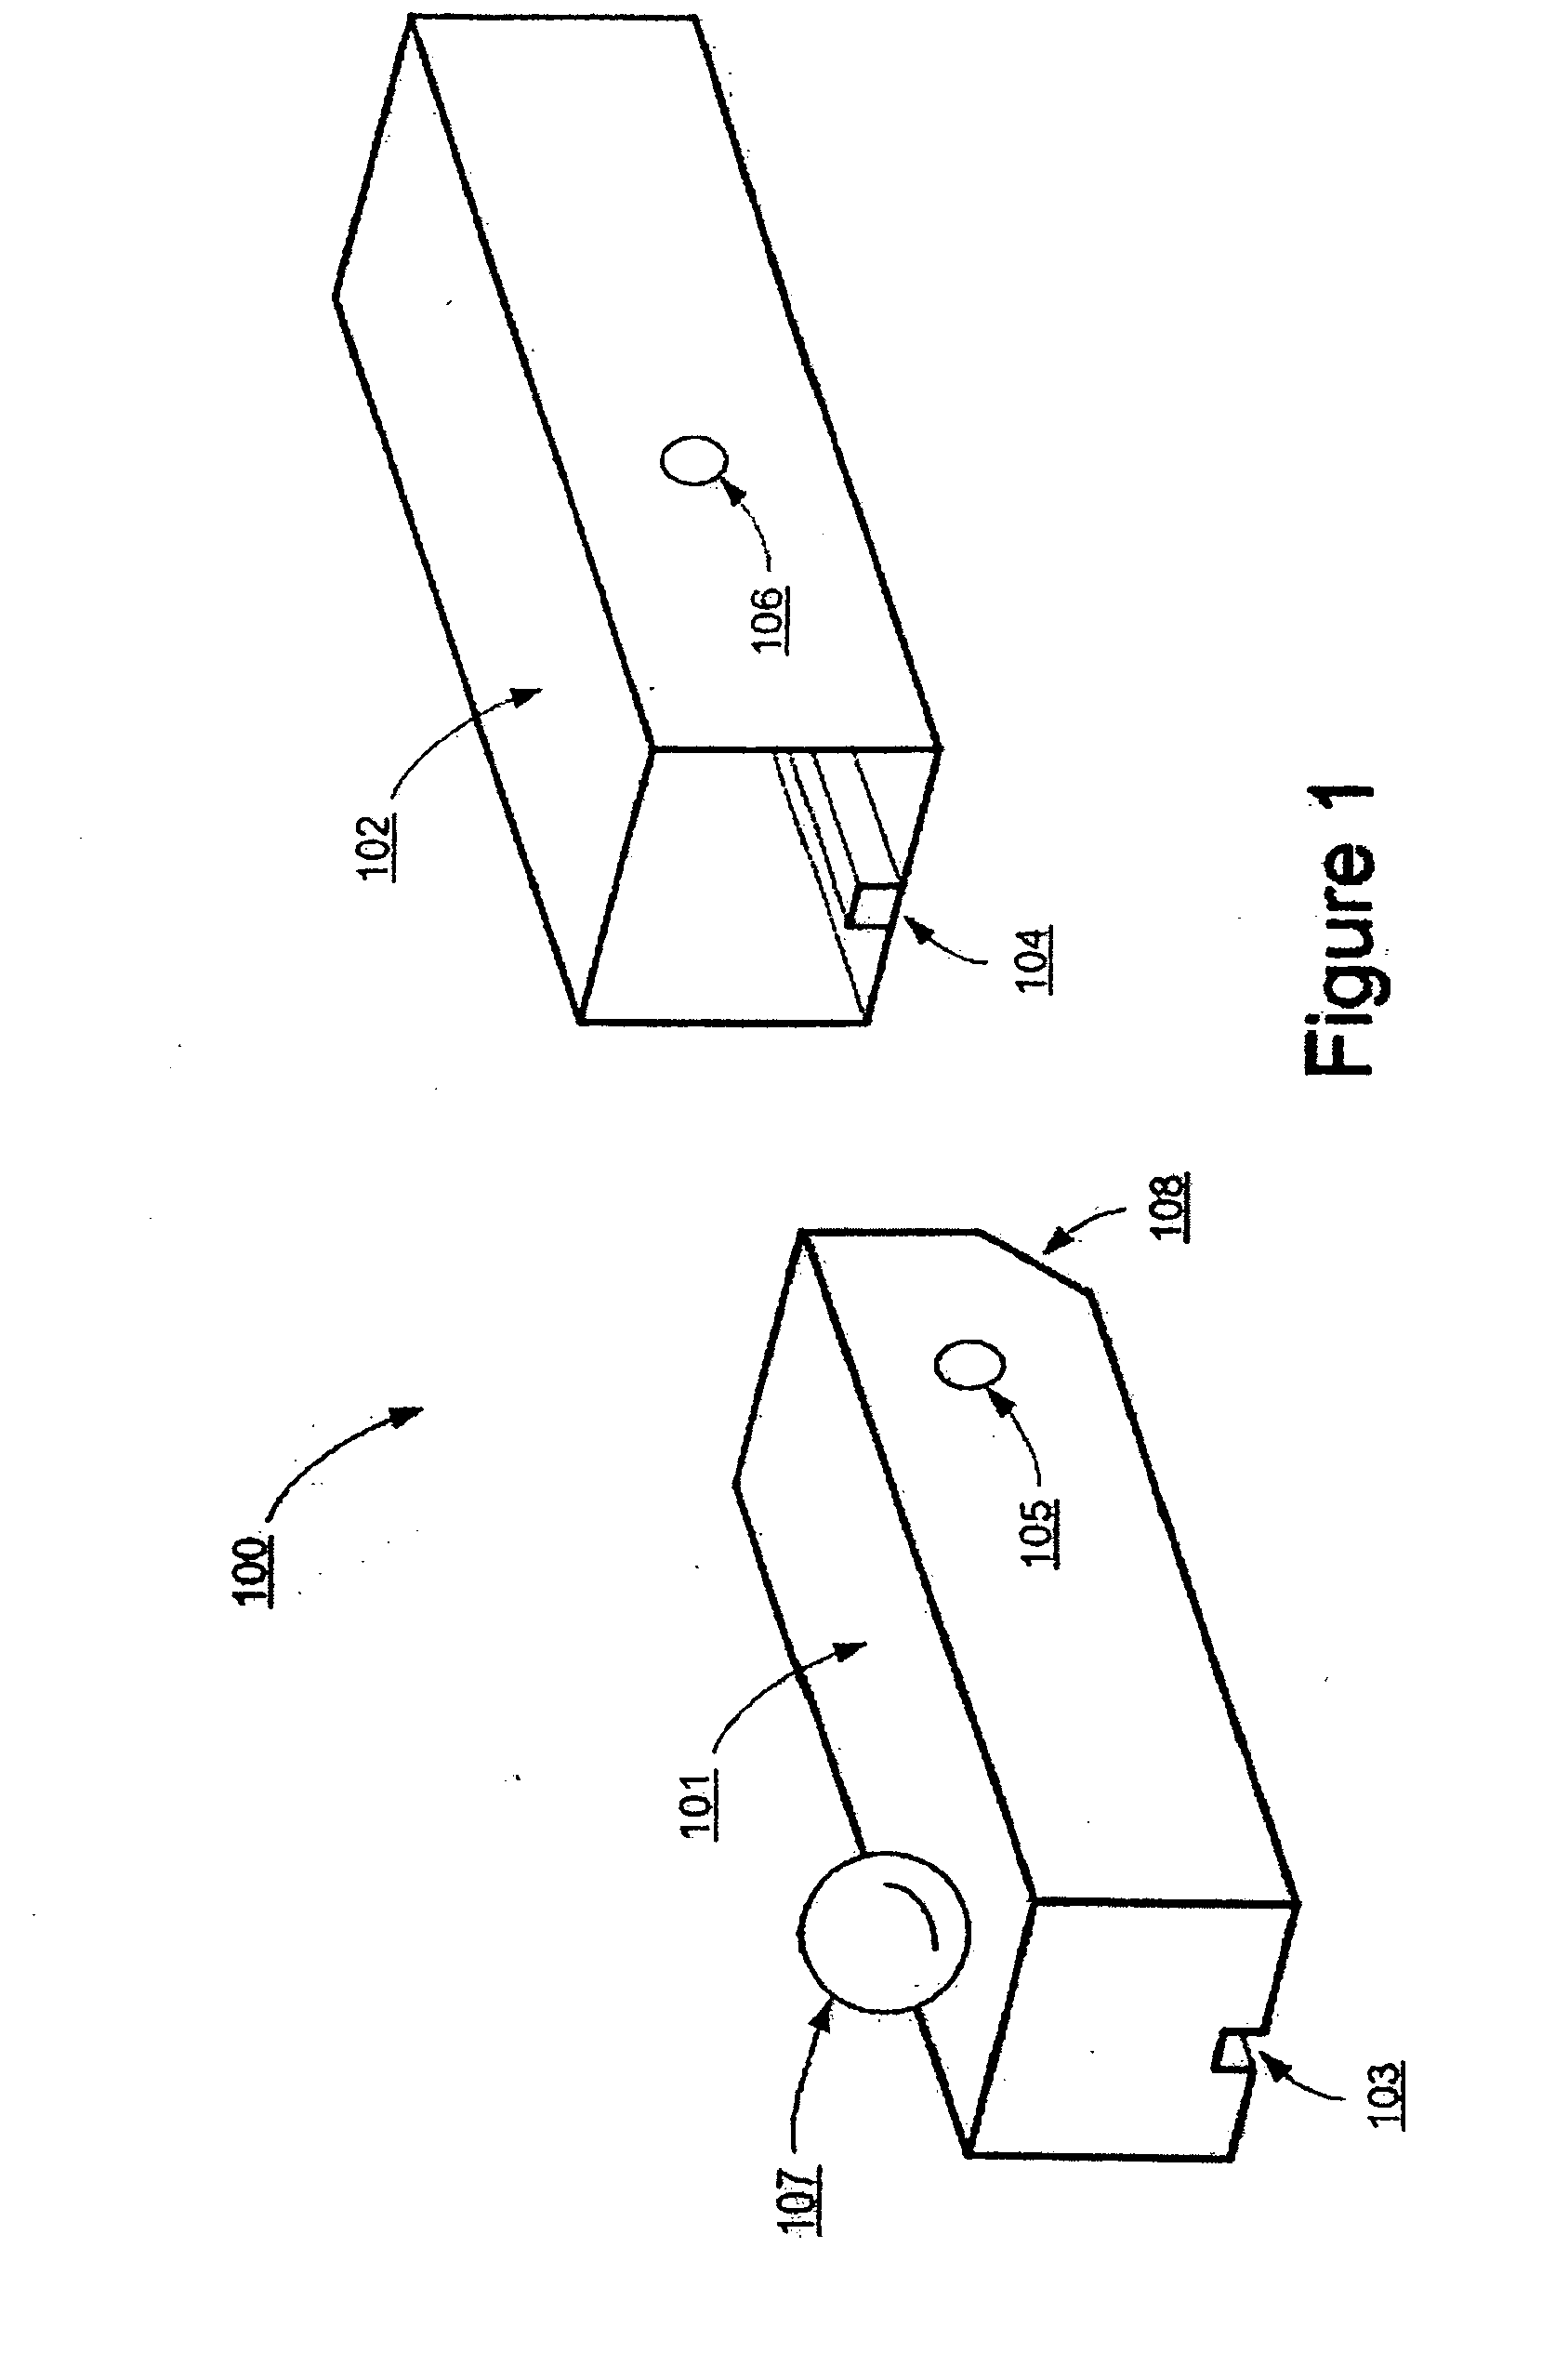 Anti-wobble device for receiver-type trailer hitch